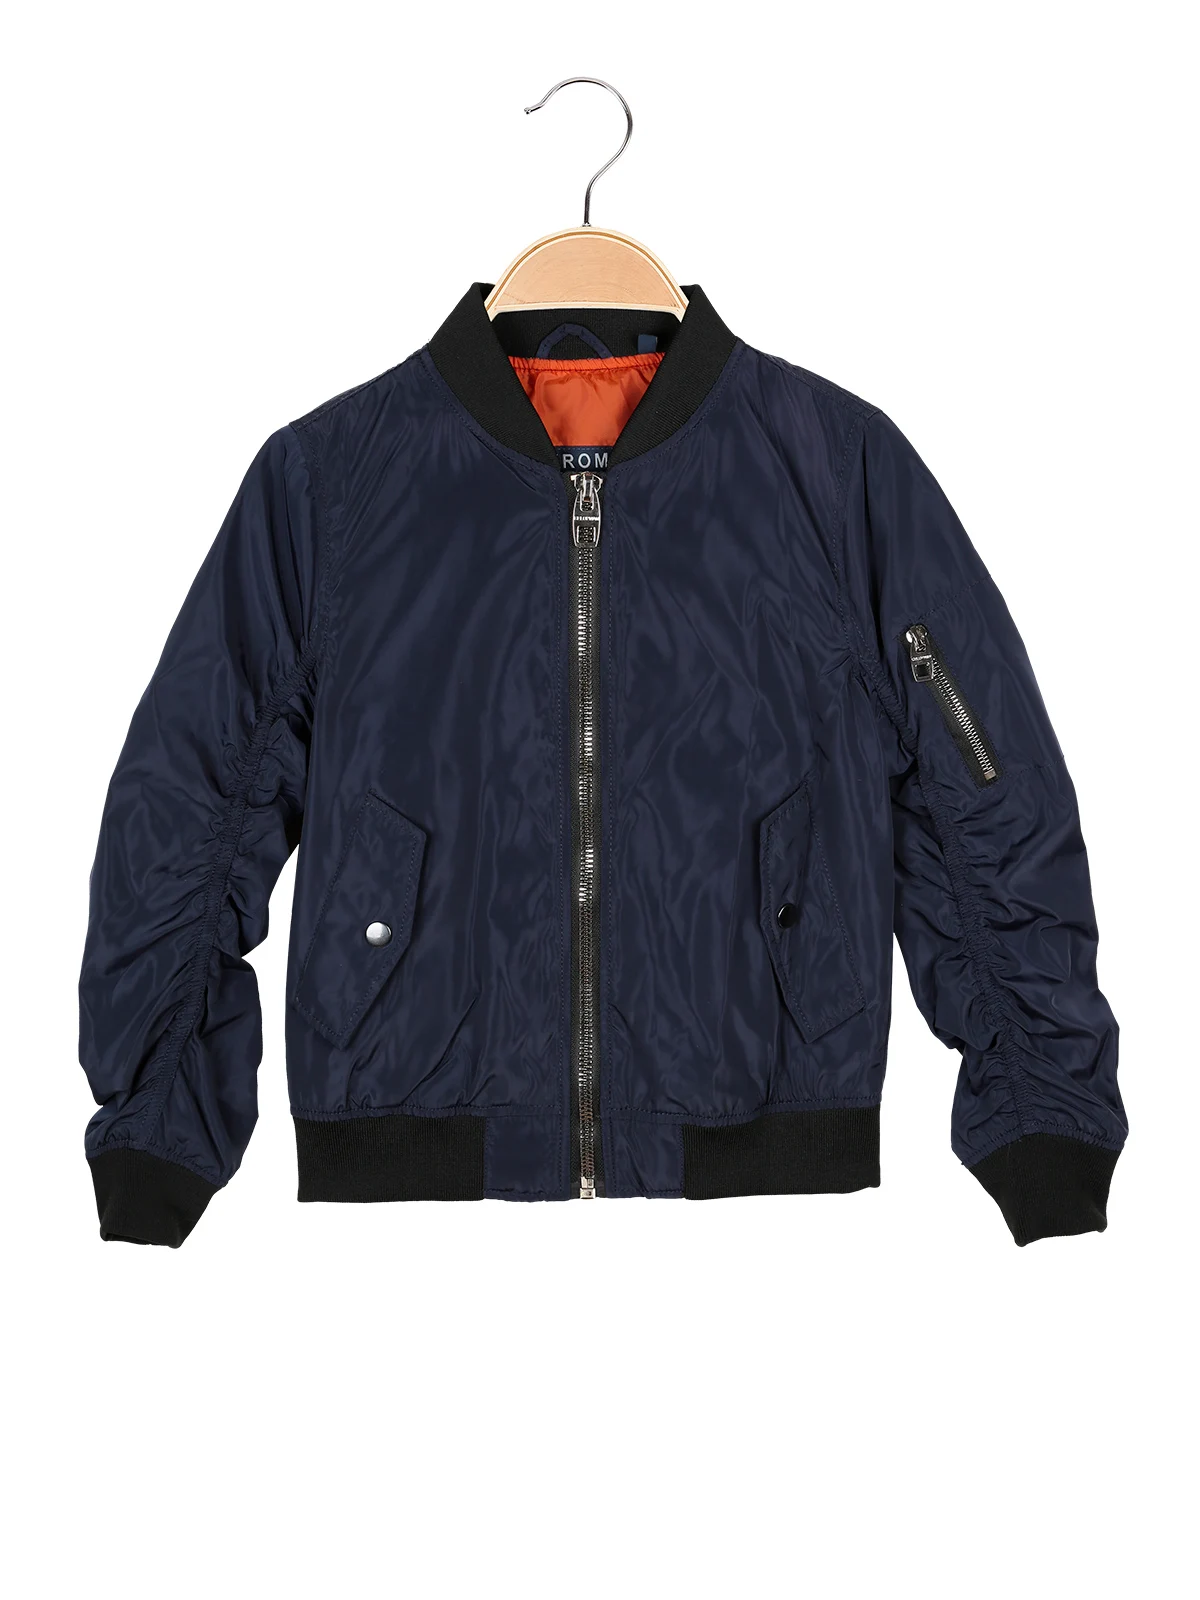 Bomber jacket child dark blue-in Jackets & Coats from Mother & Kids on ...